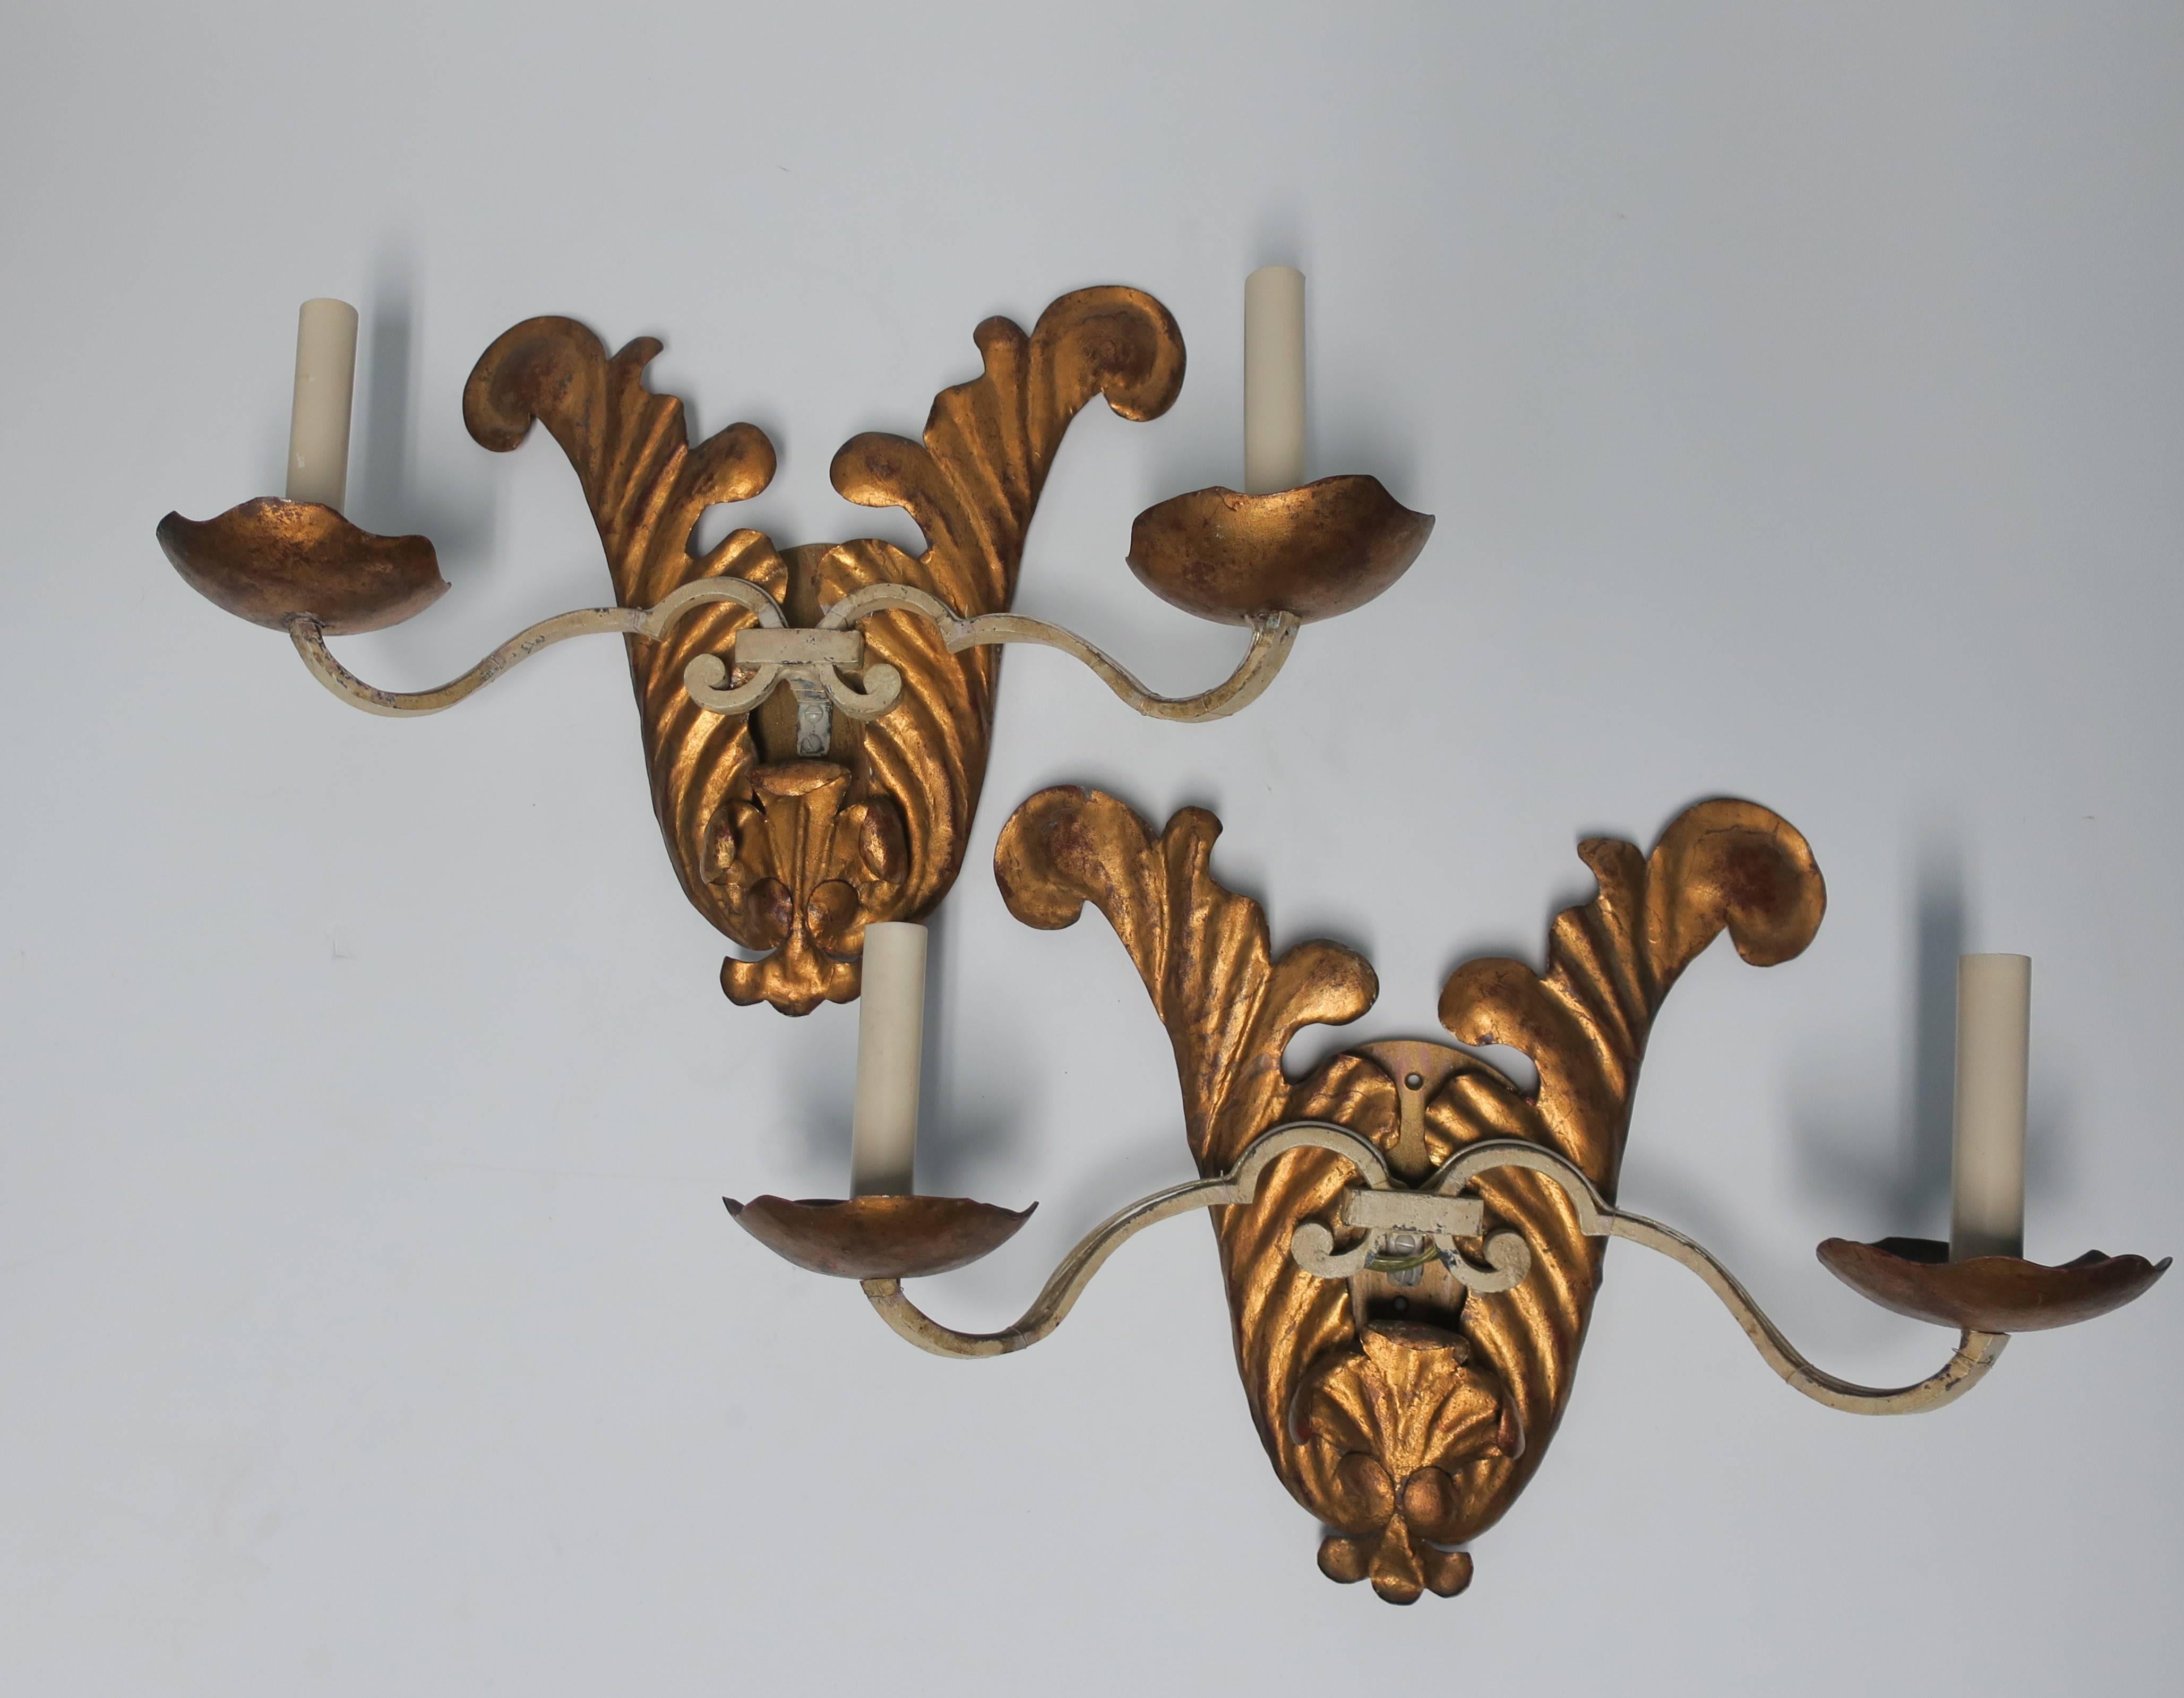 A beautiful vintage pair of enameled white iron and copper gilt tole sconces with two lights each. Wired for U.S. electric. 

Sconces measure 18.5 in. W x 12.5 in. H x 6.75 in. D. 

